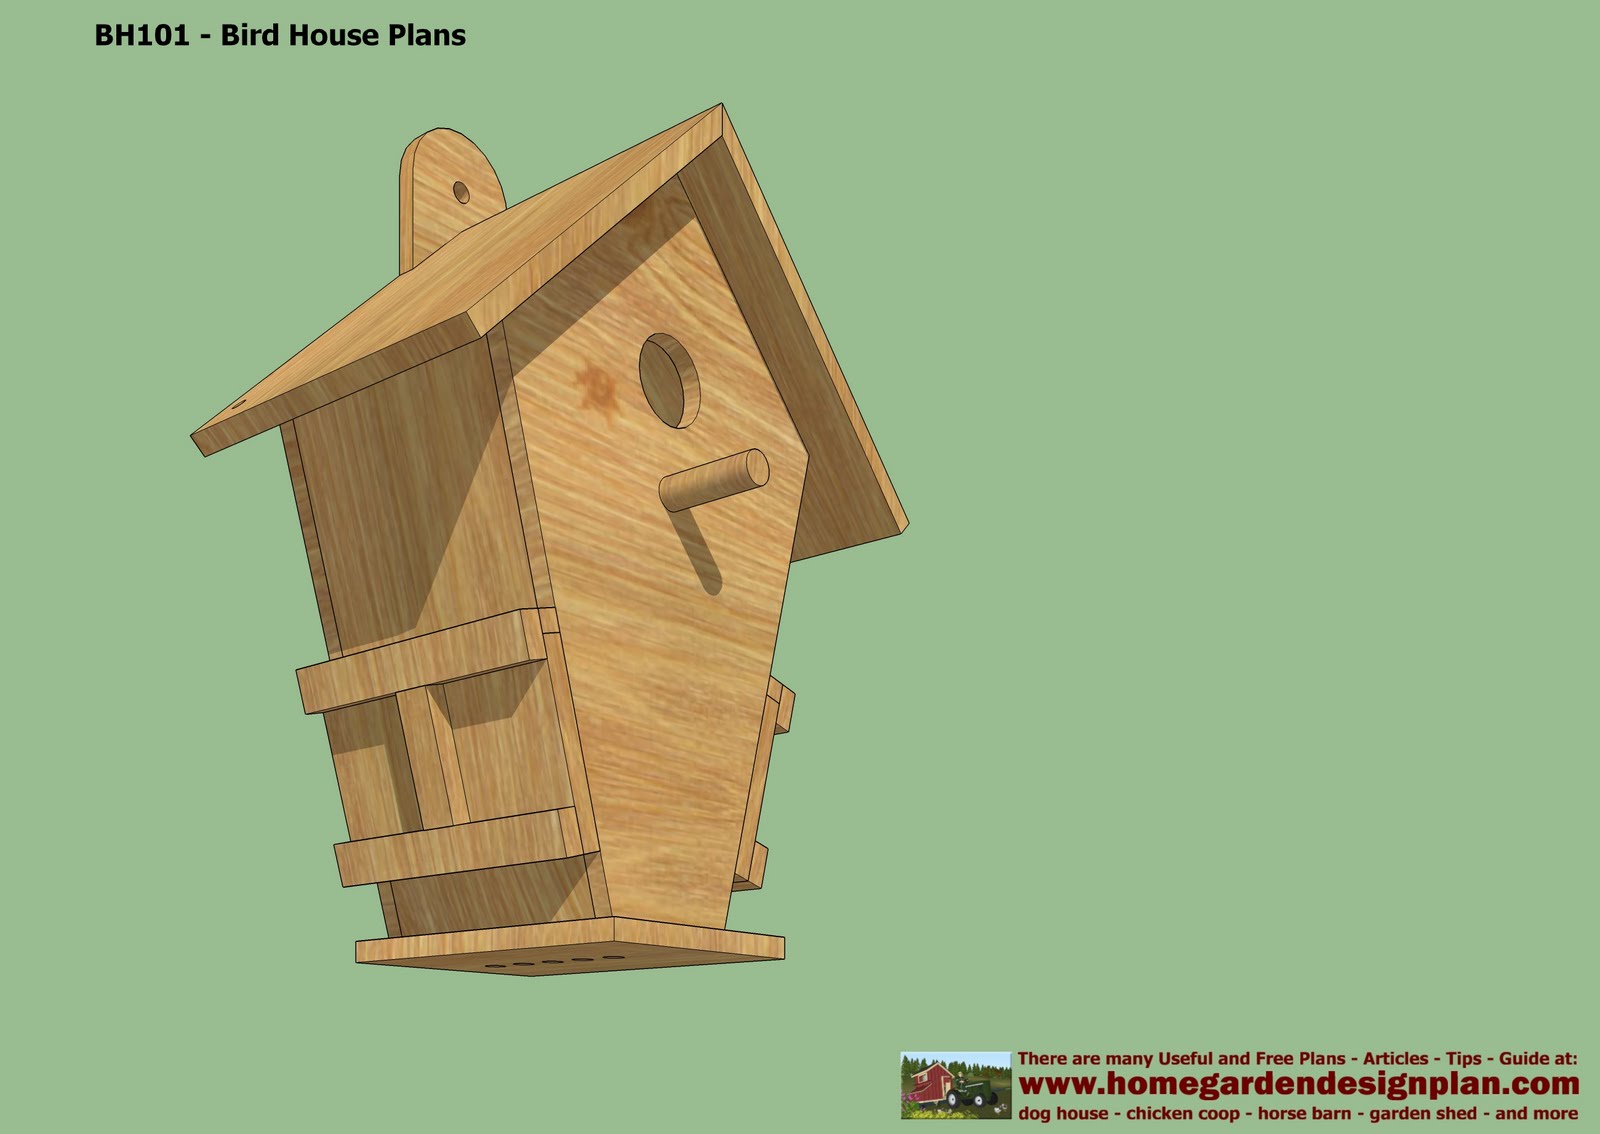 How to Build Bird Houses Plans Free